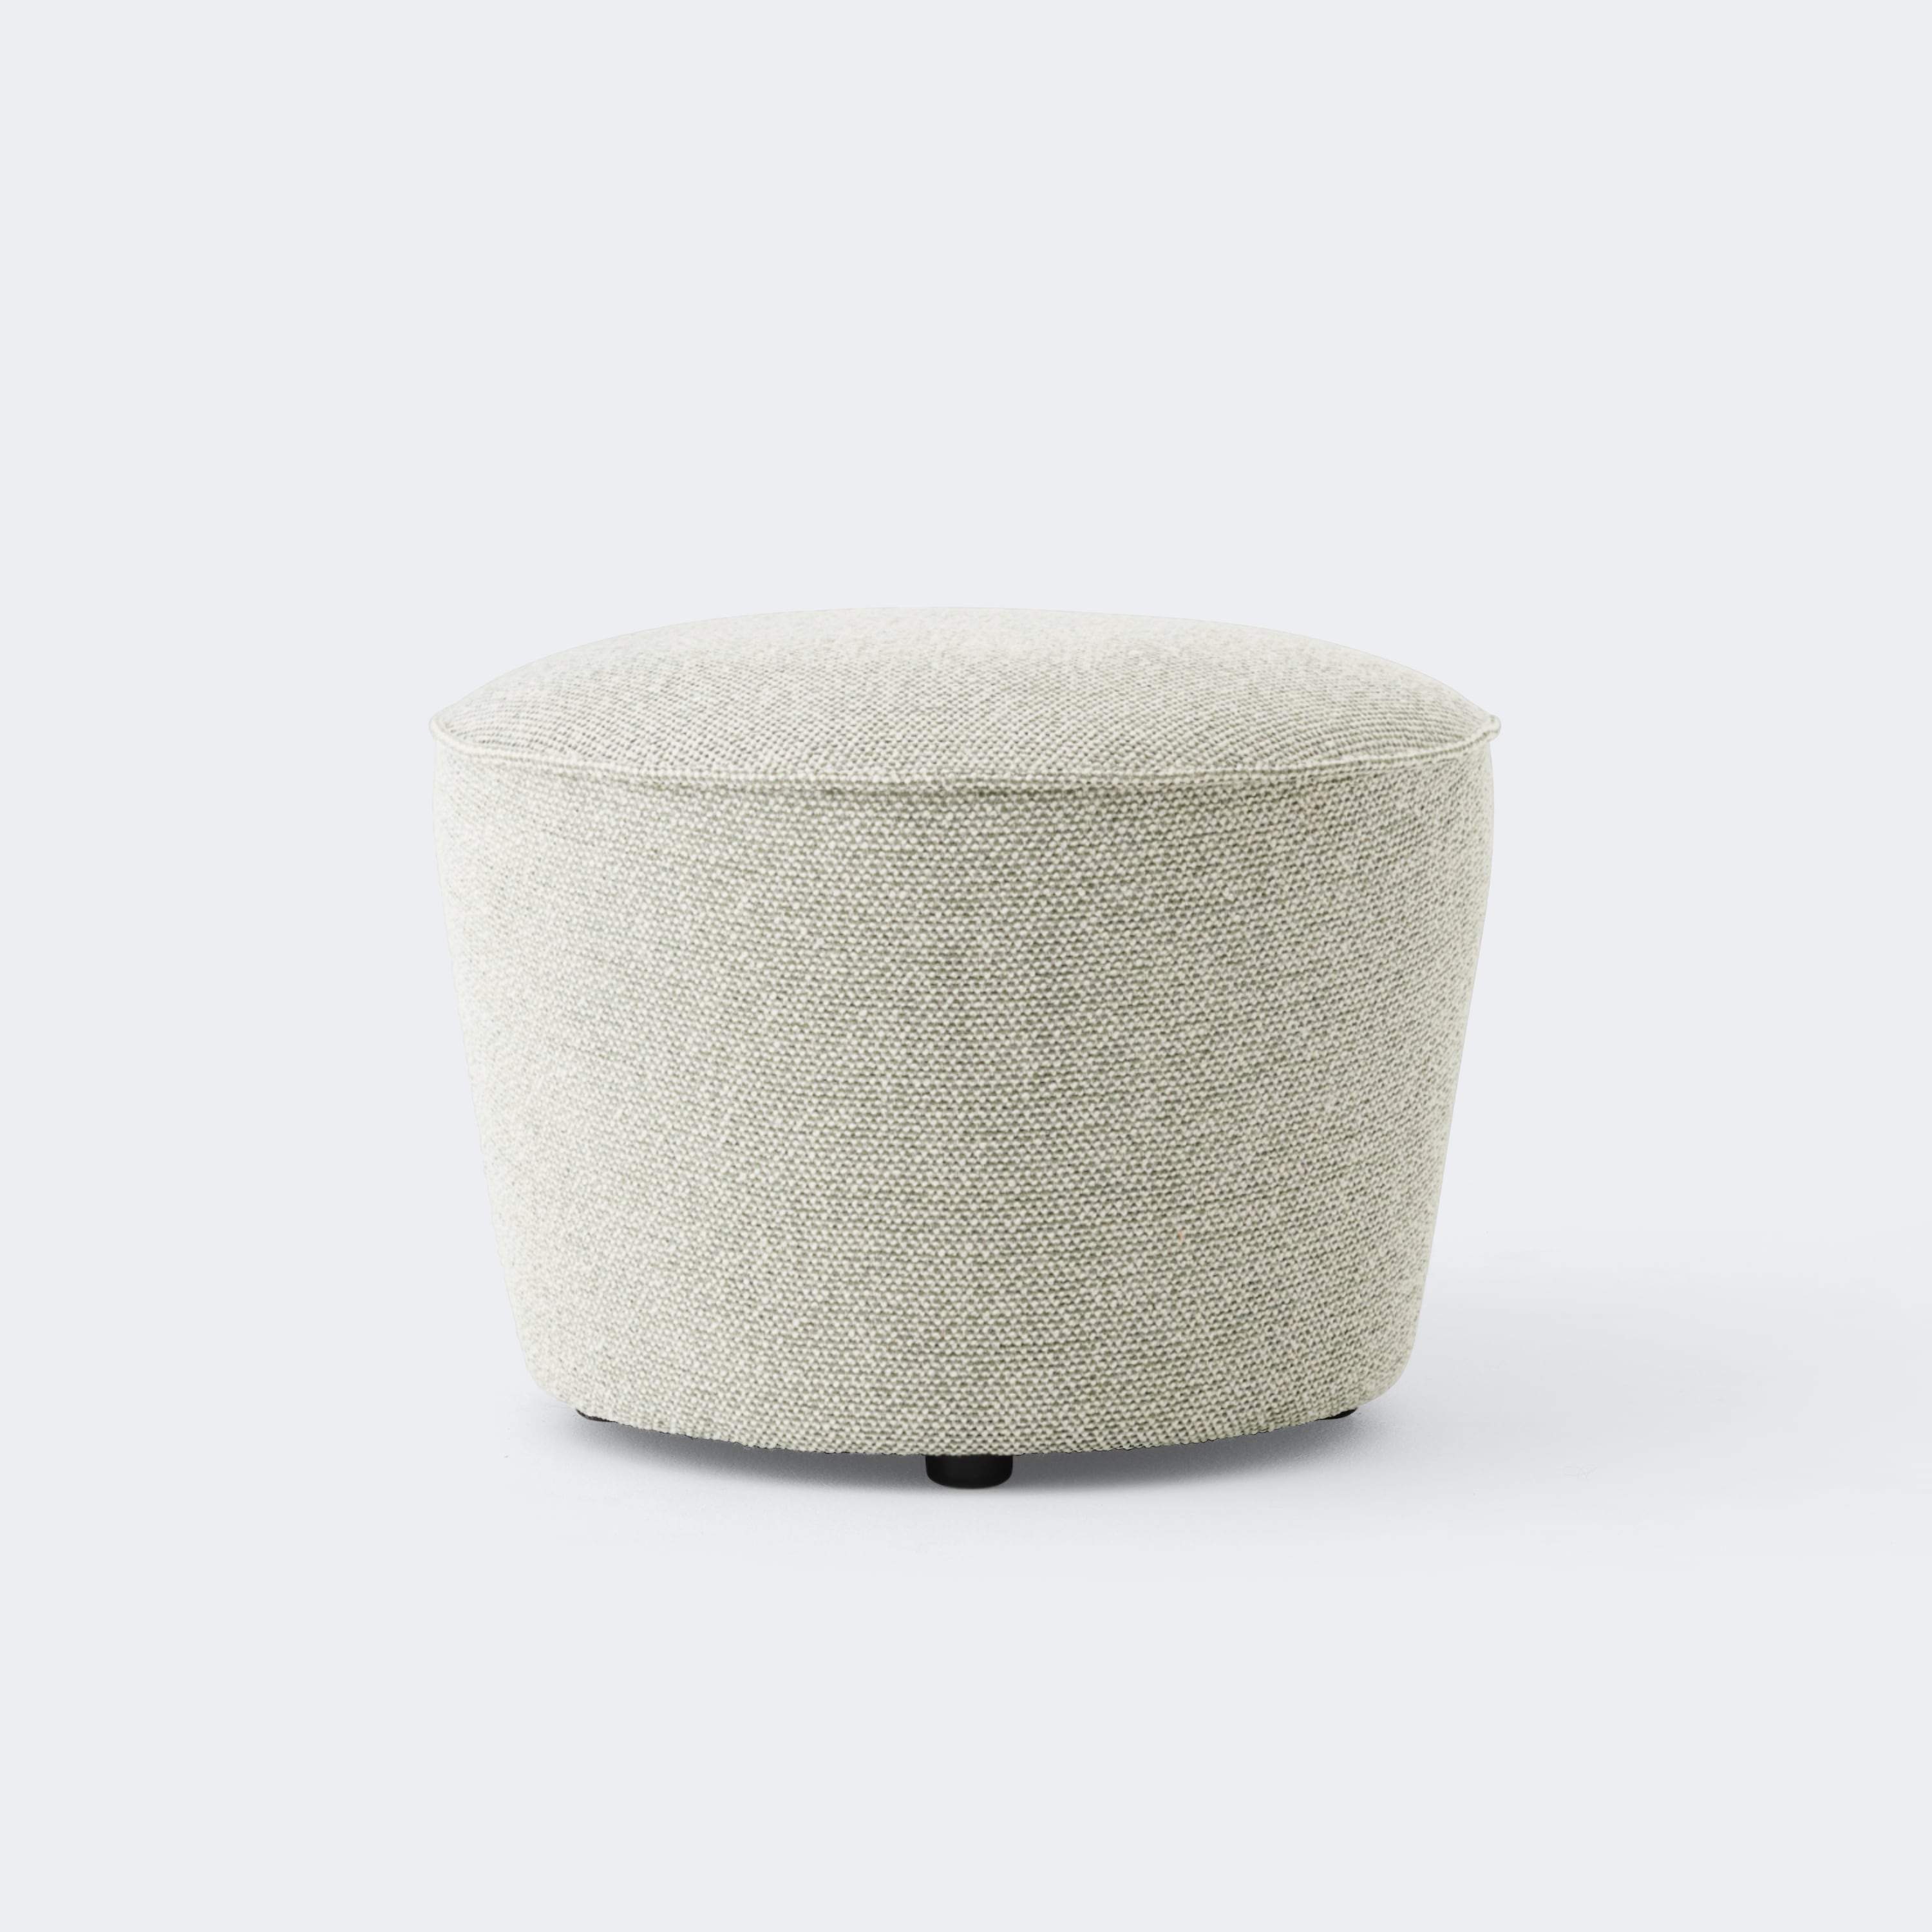 Audo Copenhagen Tearoom Cairn Pouf Made To Order (12-14 Weeks) Round (24in x 24in) Safire #06 - KANSO